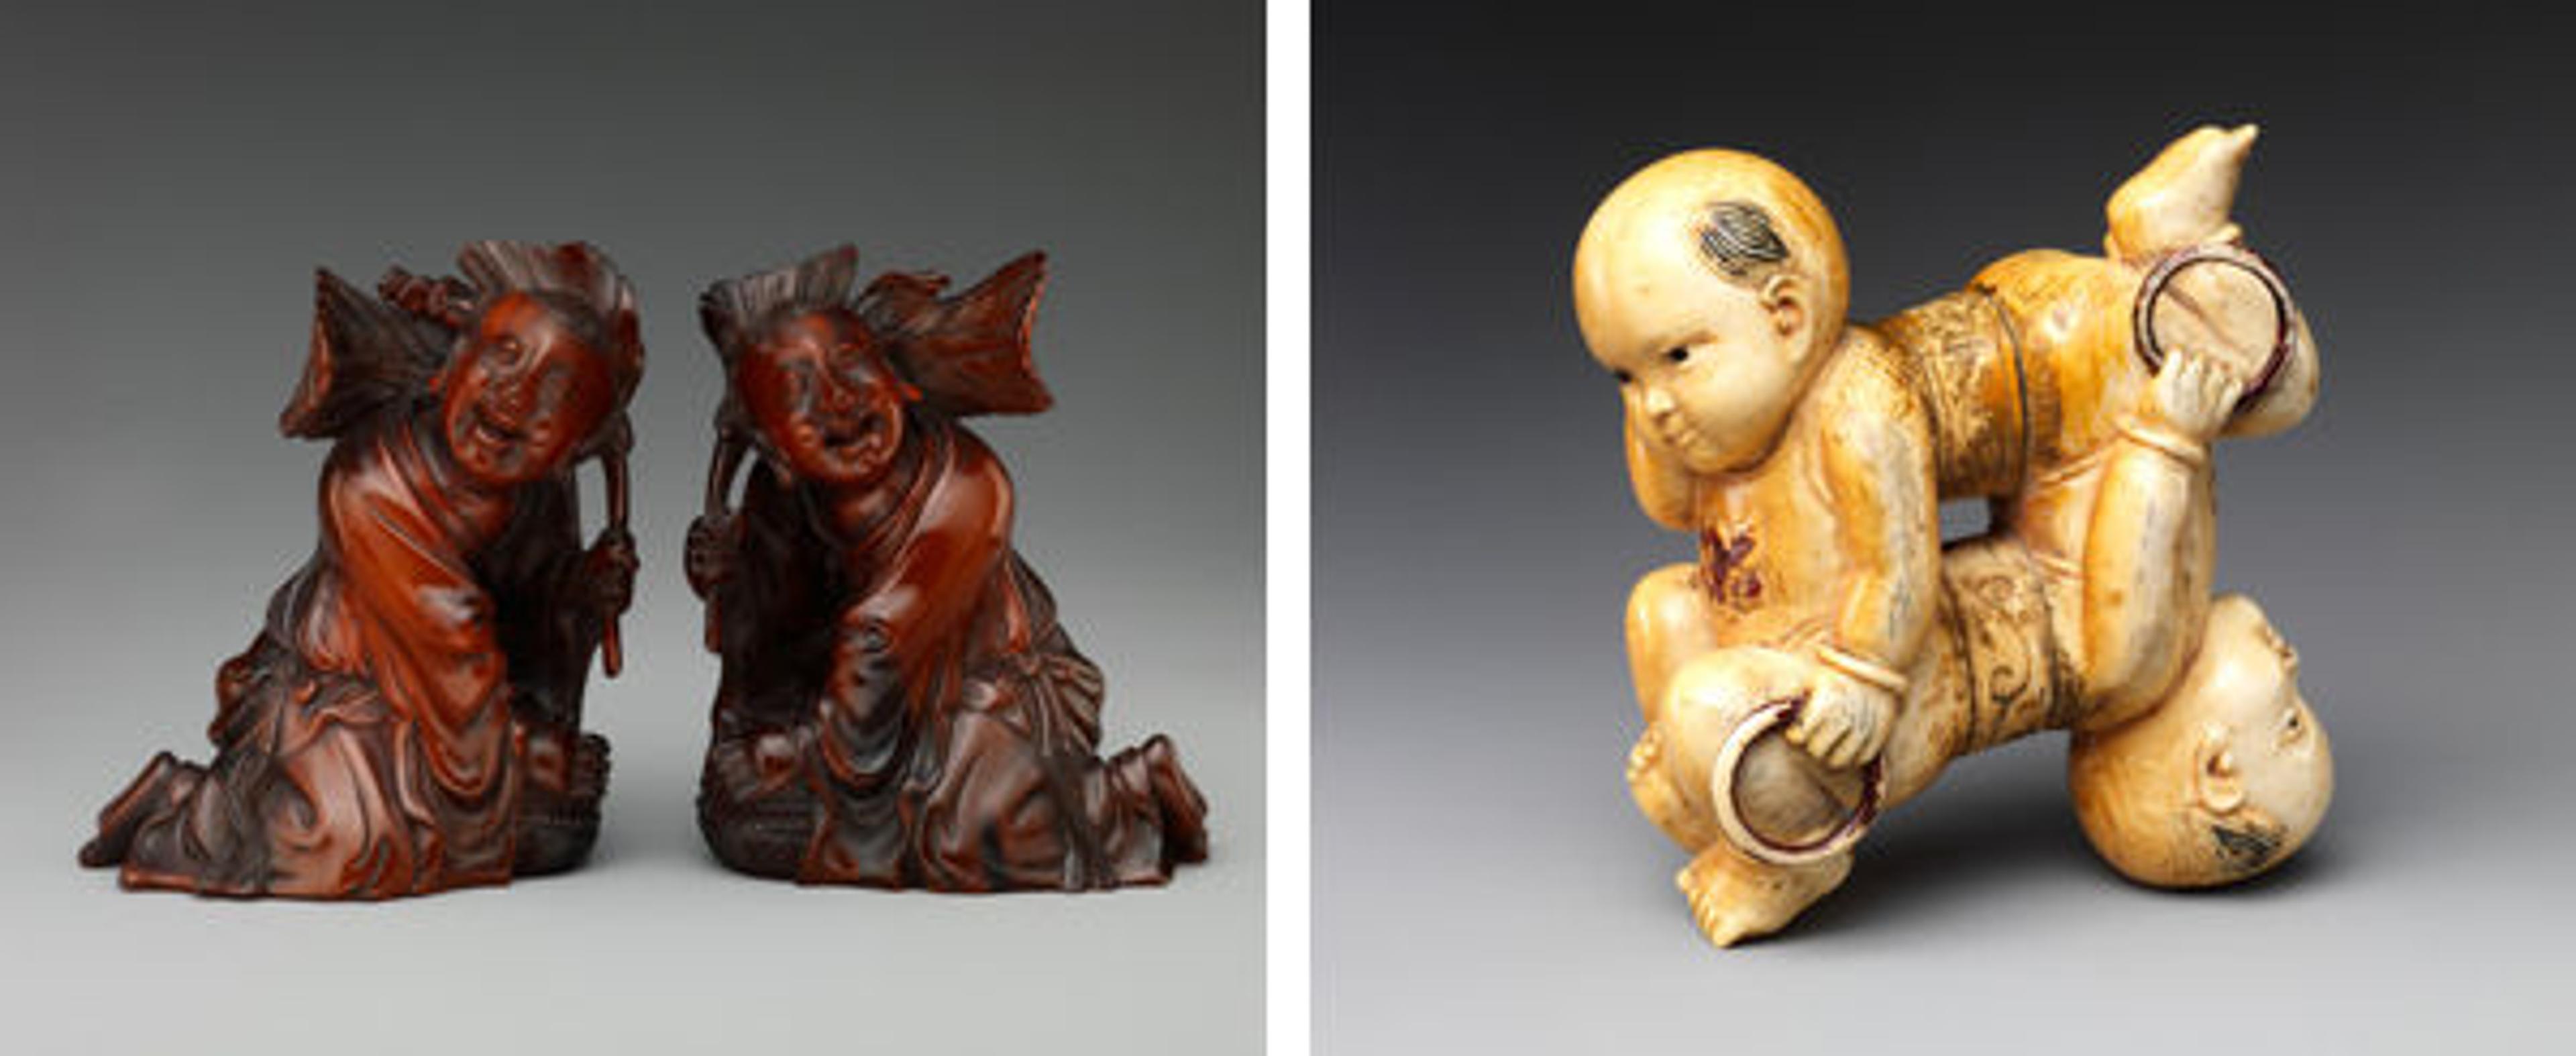 Left: Boys with Leaves and Boxes. China, Qing dynasty (1644–1911), 19th century; Right: Twin Boys. China, Qing dynasty (1644–1911), 18th century